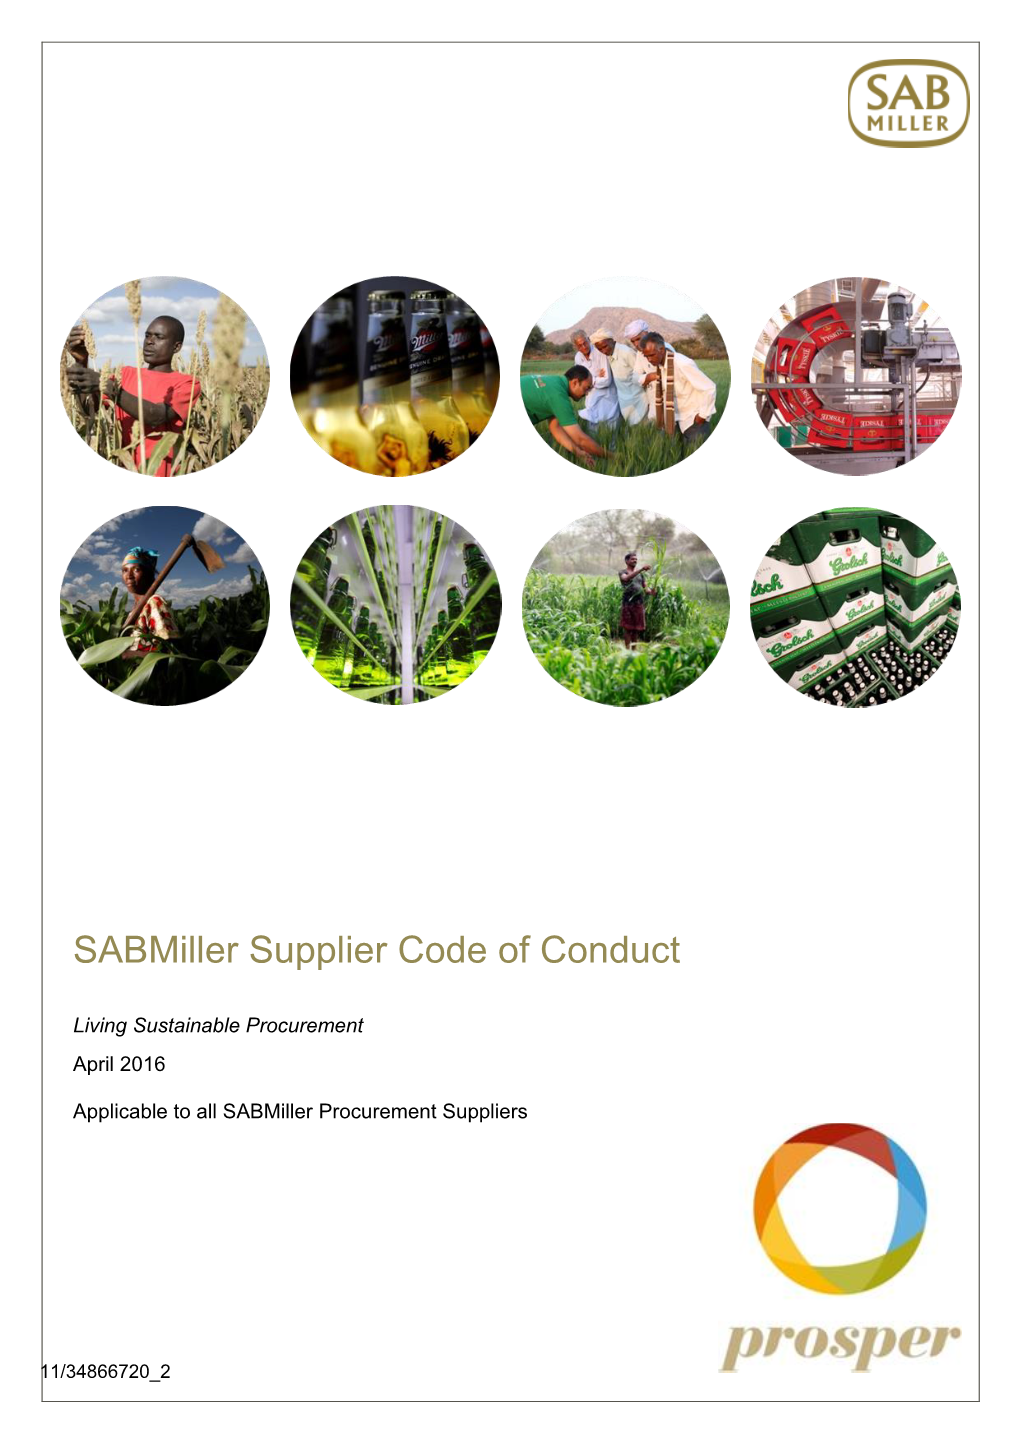 Sabmiller Supplier Code of Conduct